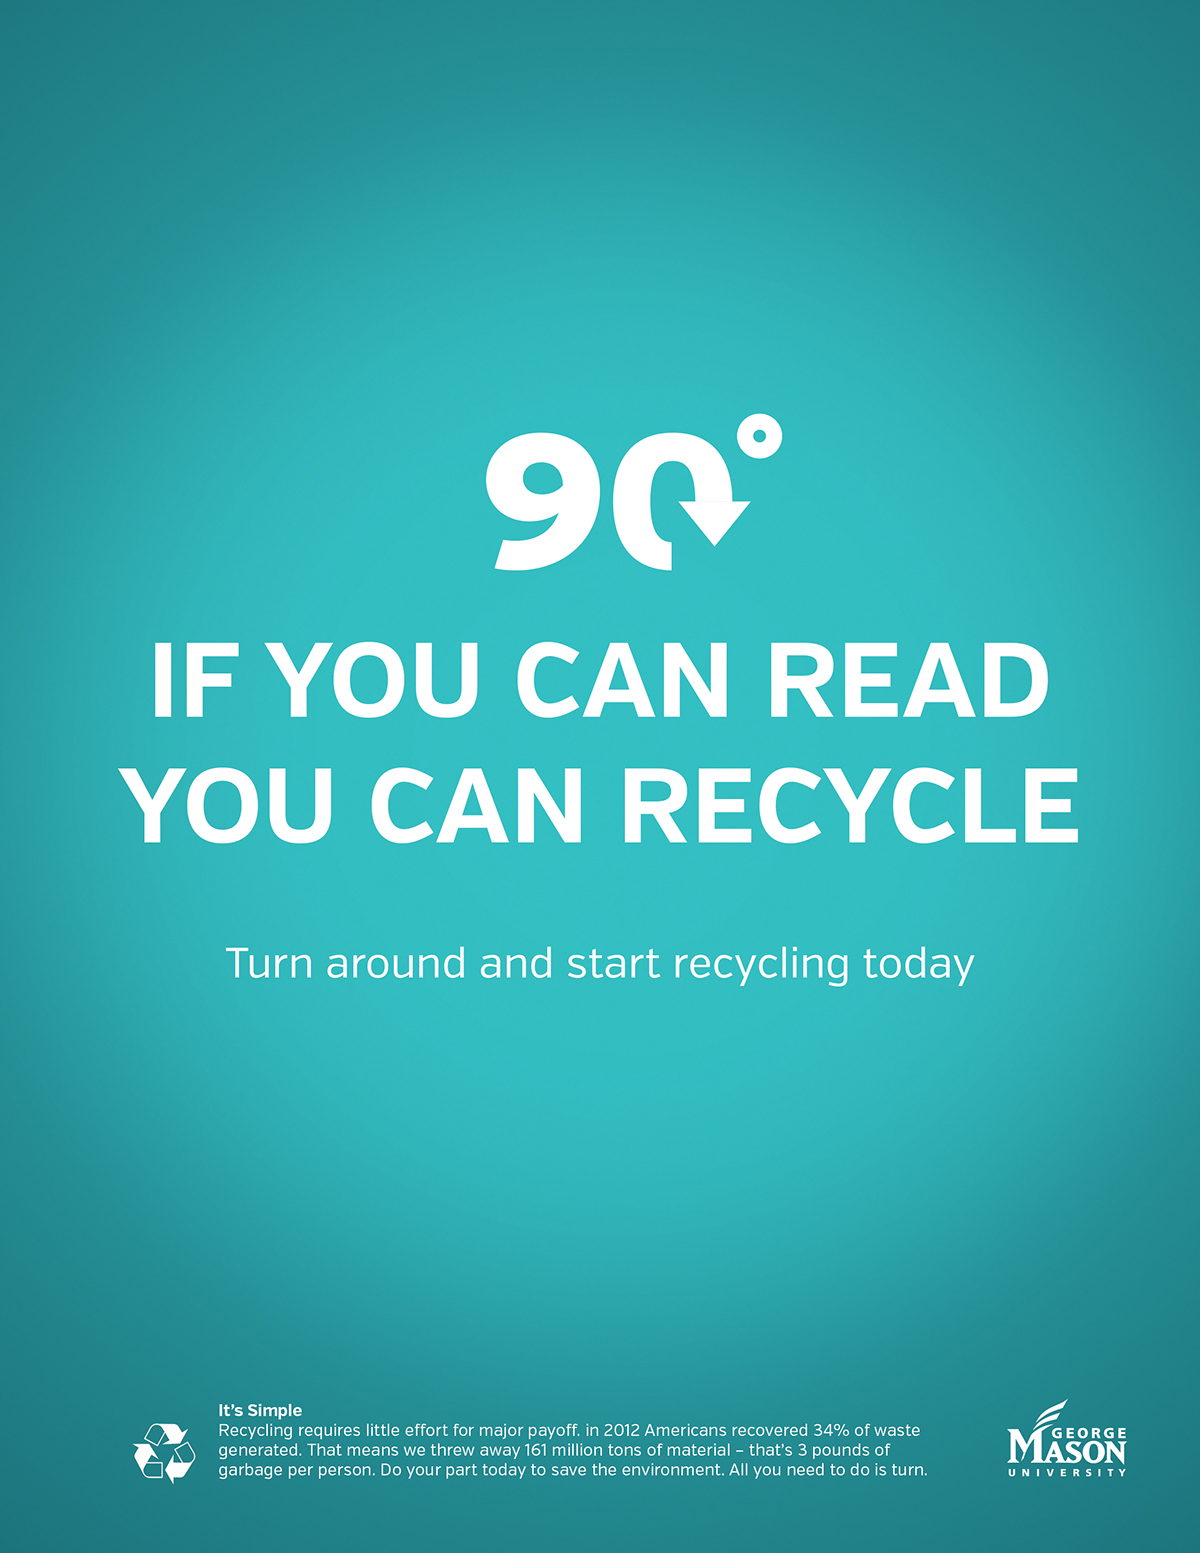 recycling campaign environmental Initiative